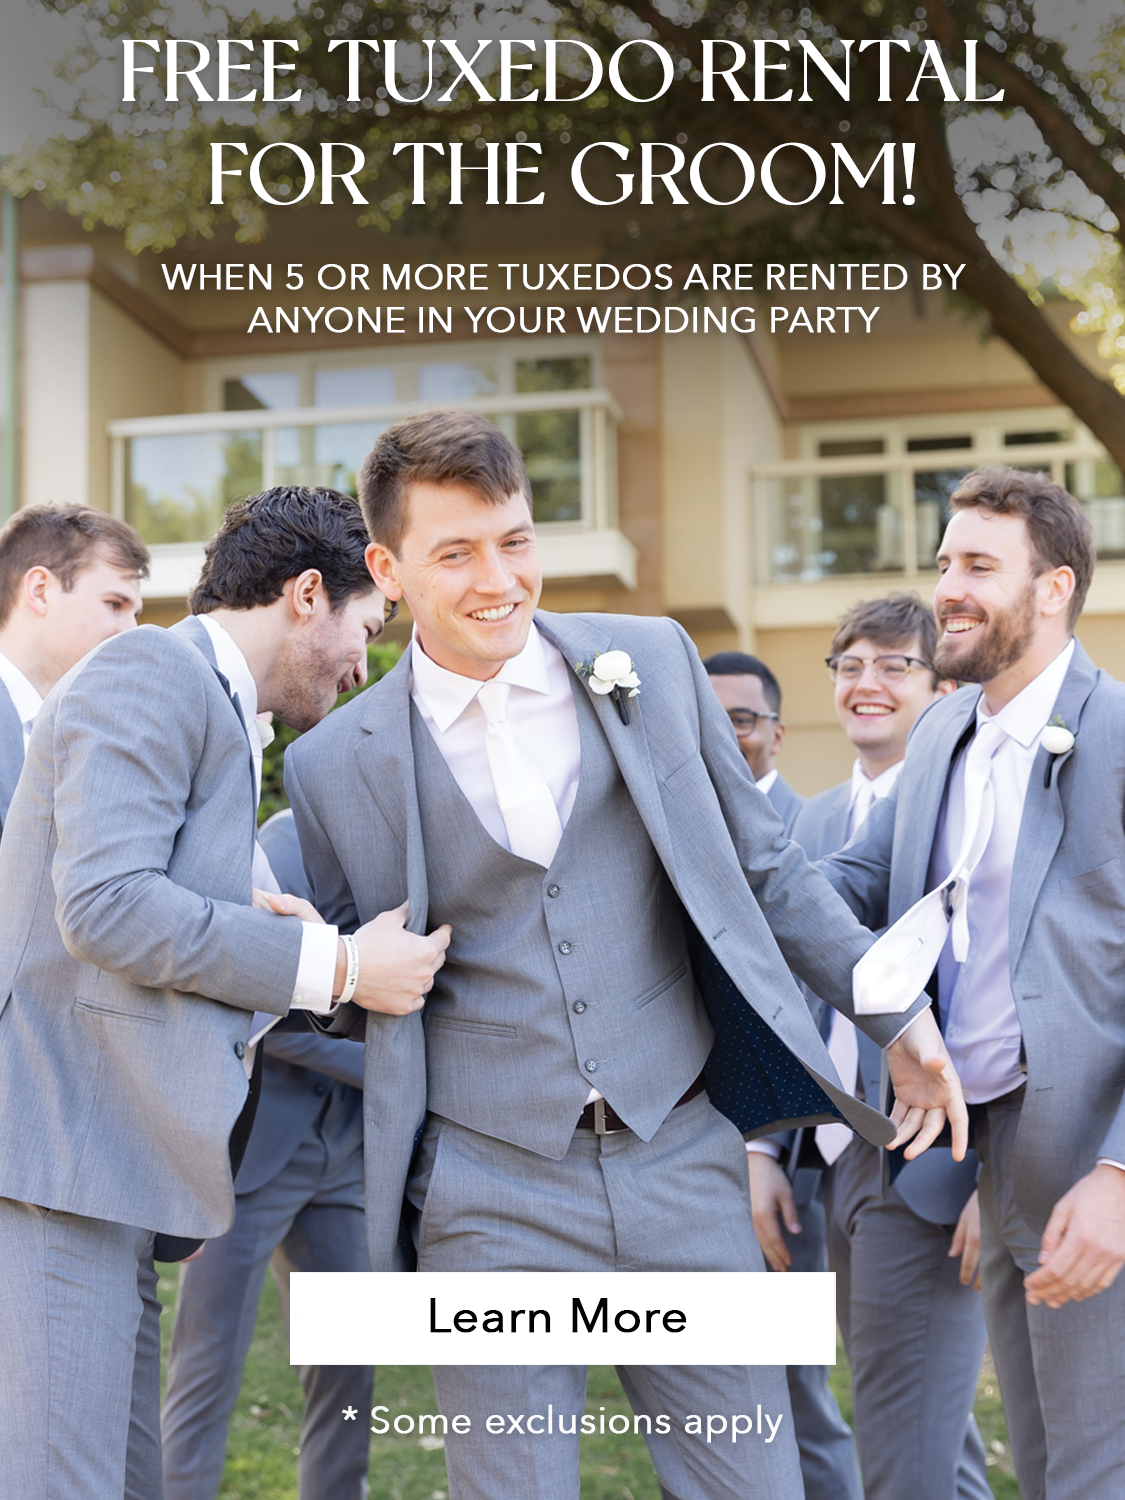 Free tuxedo for the groom when 5 or more tuxedos are rented by anyone in your wedding party!